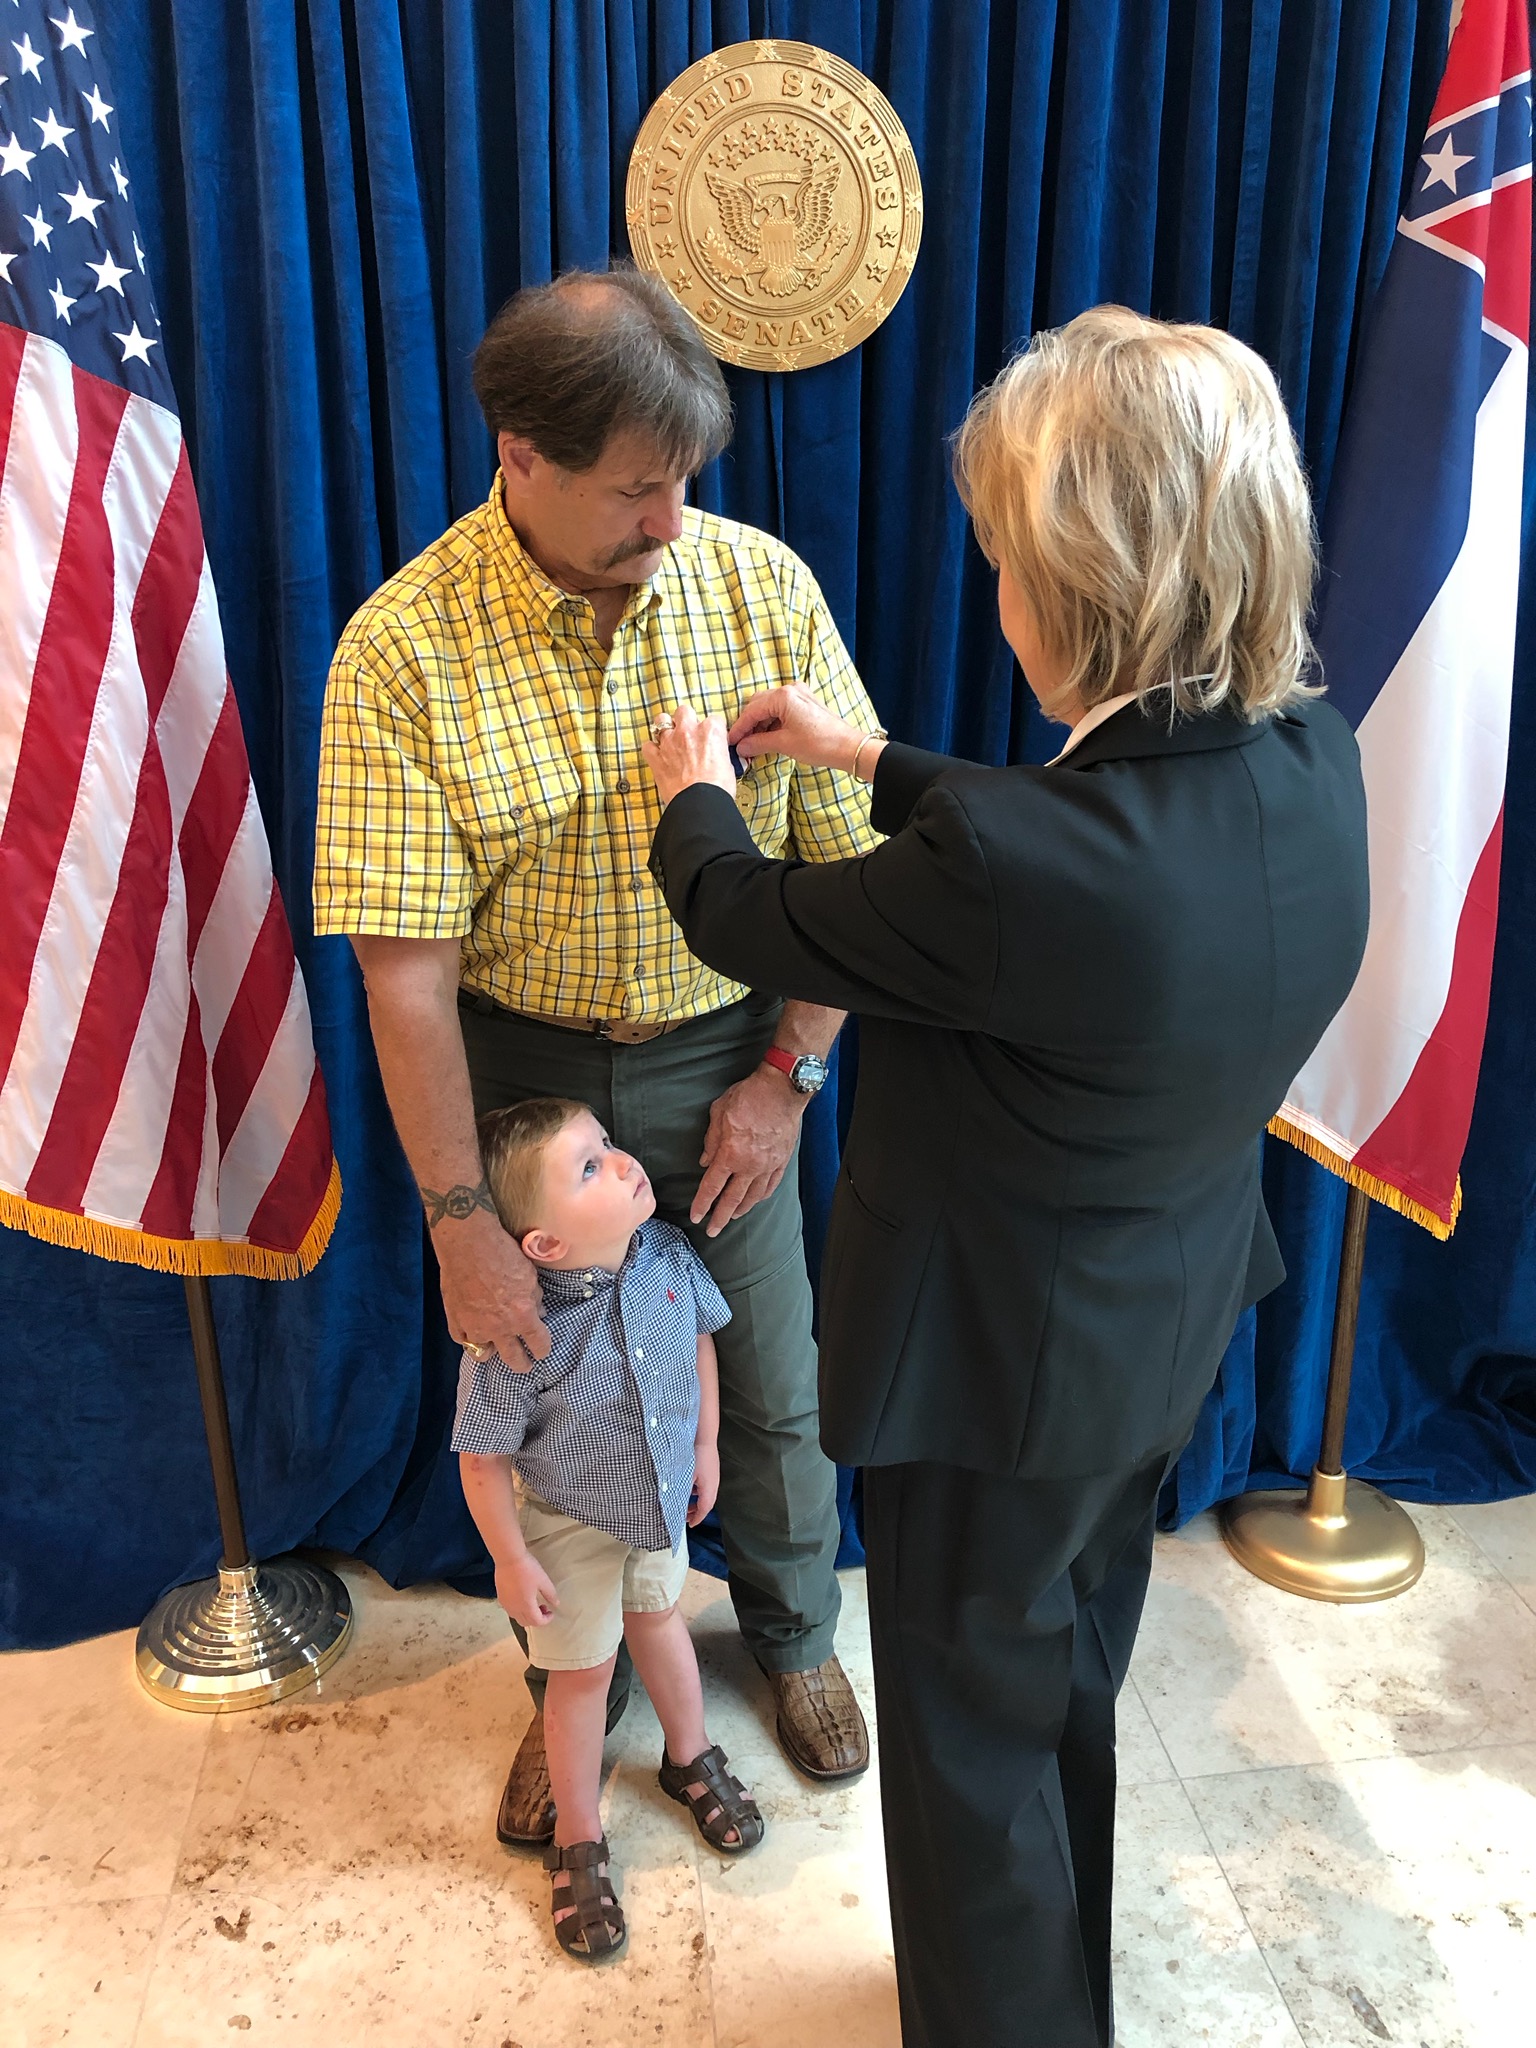 Jay Blount of Greenville and grandson Sutton.  Defense of Freedom Medal